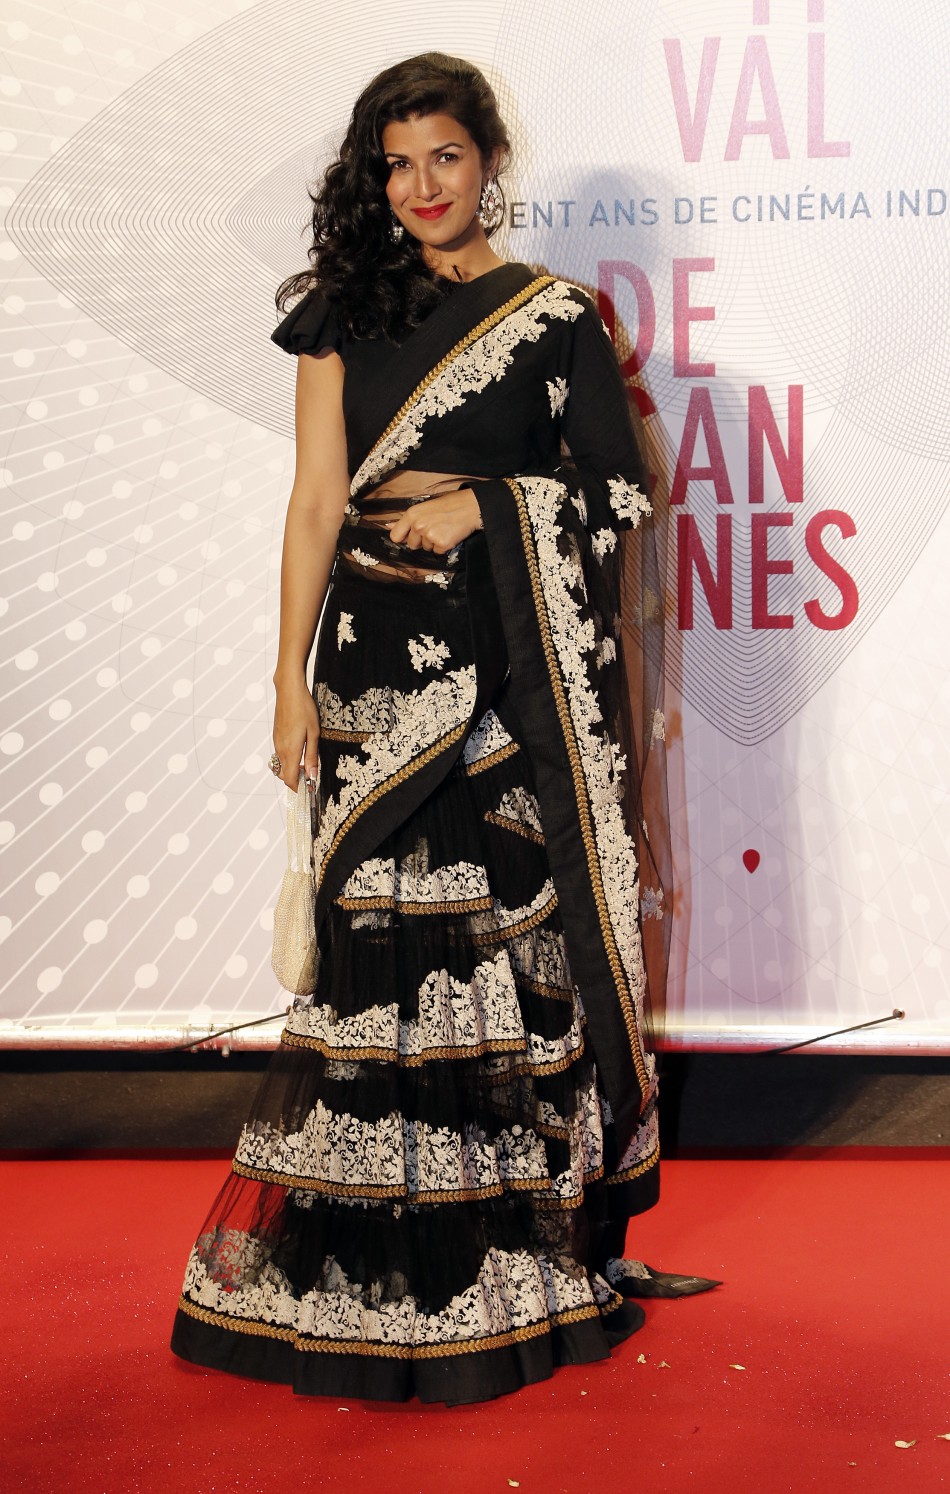 Actress Nimrit Kaur poses as she arrives at the evenings gala of the film Bombay Talkies celebrating a hundred years of Indian cinema, during the 66th Cannes Film Festival in Cannes May 19, 2013.